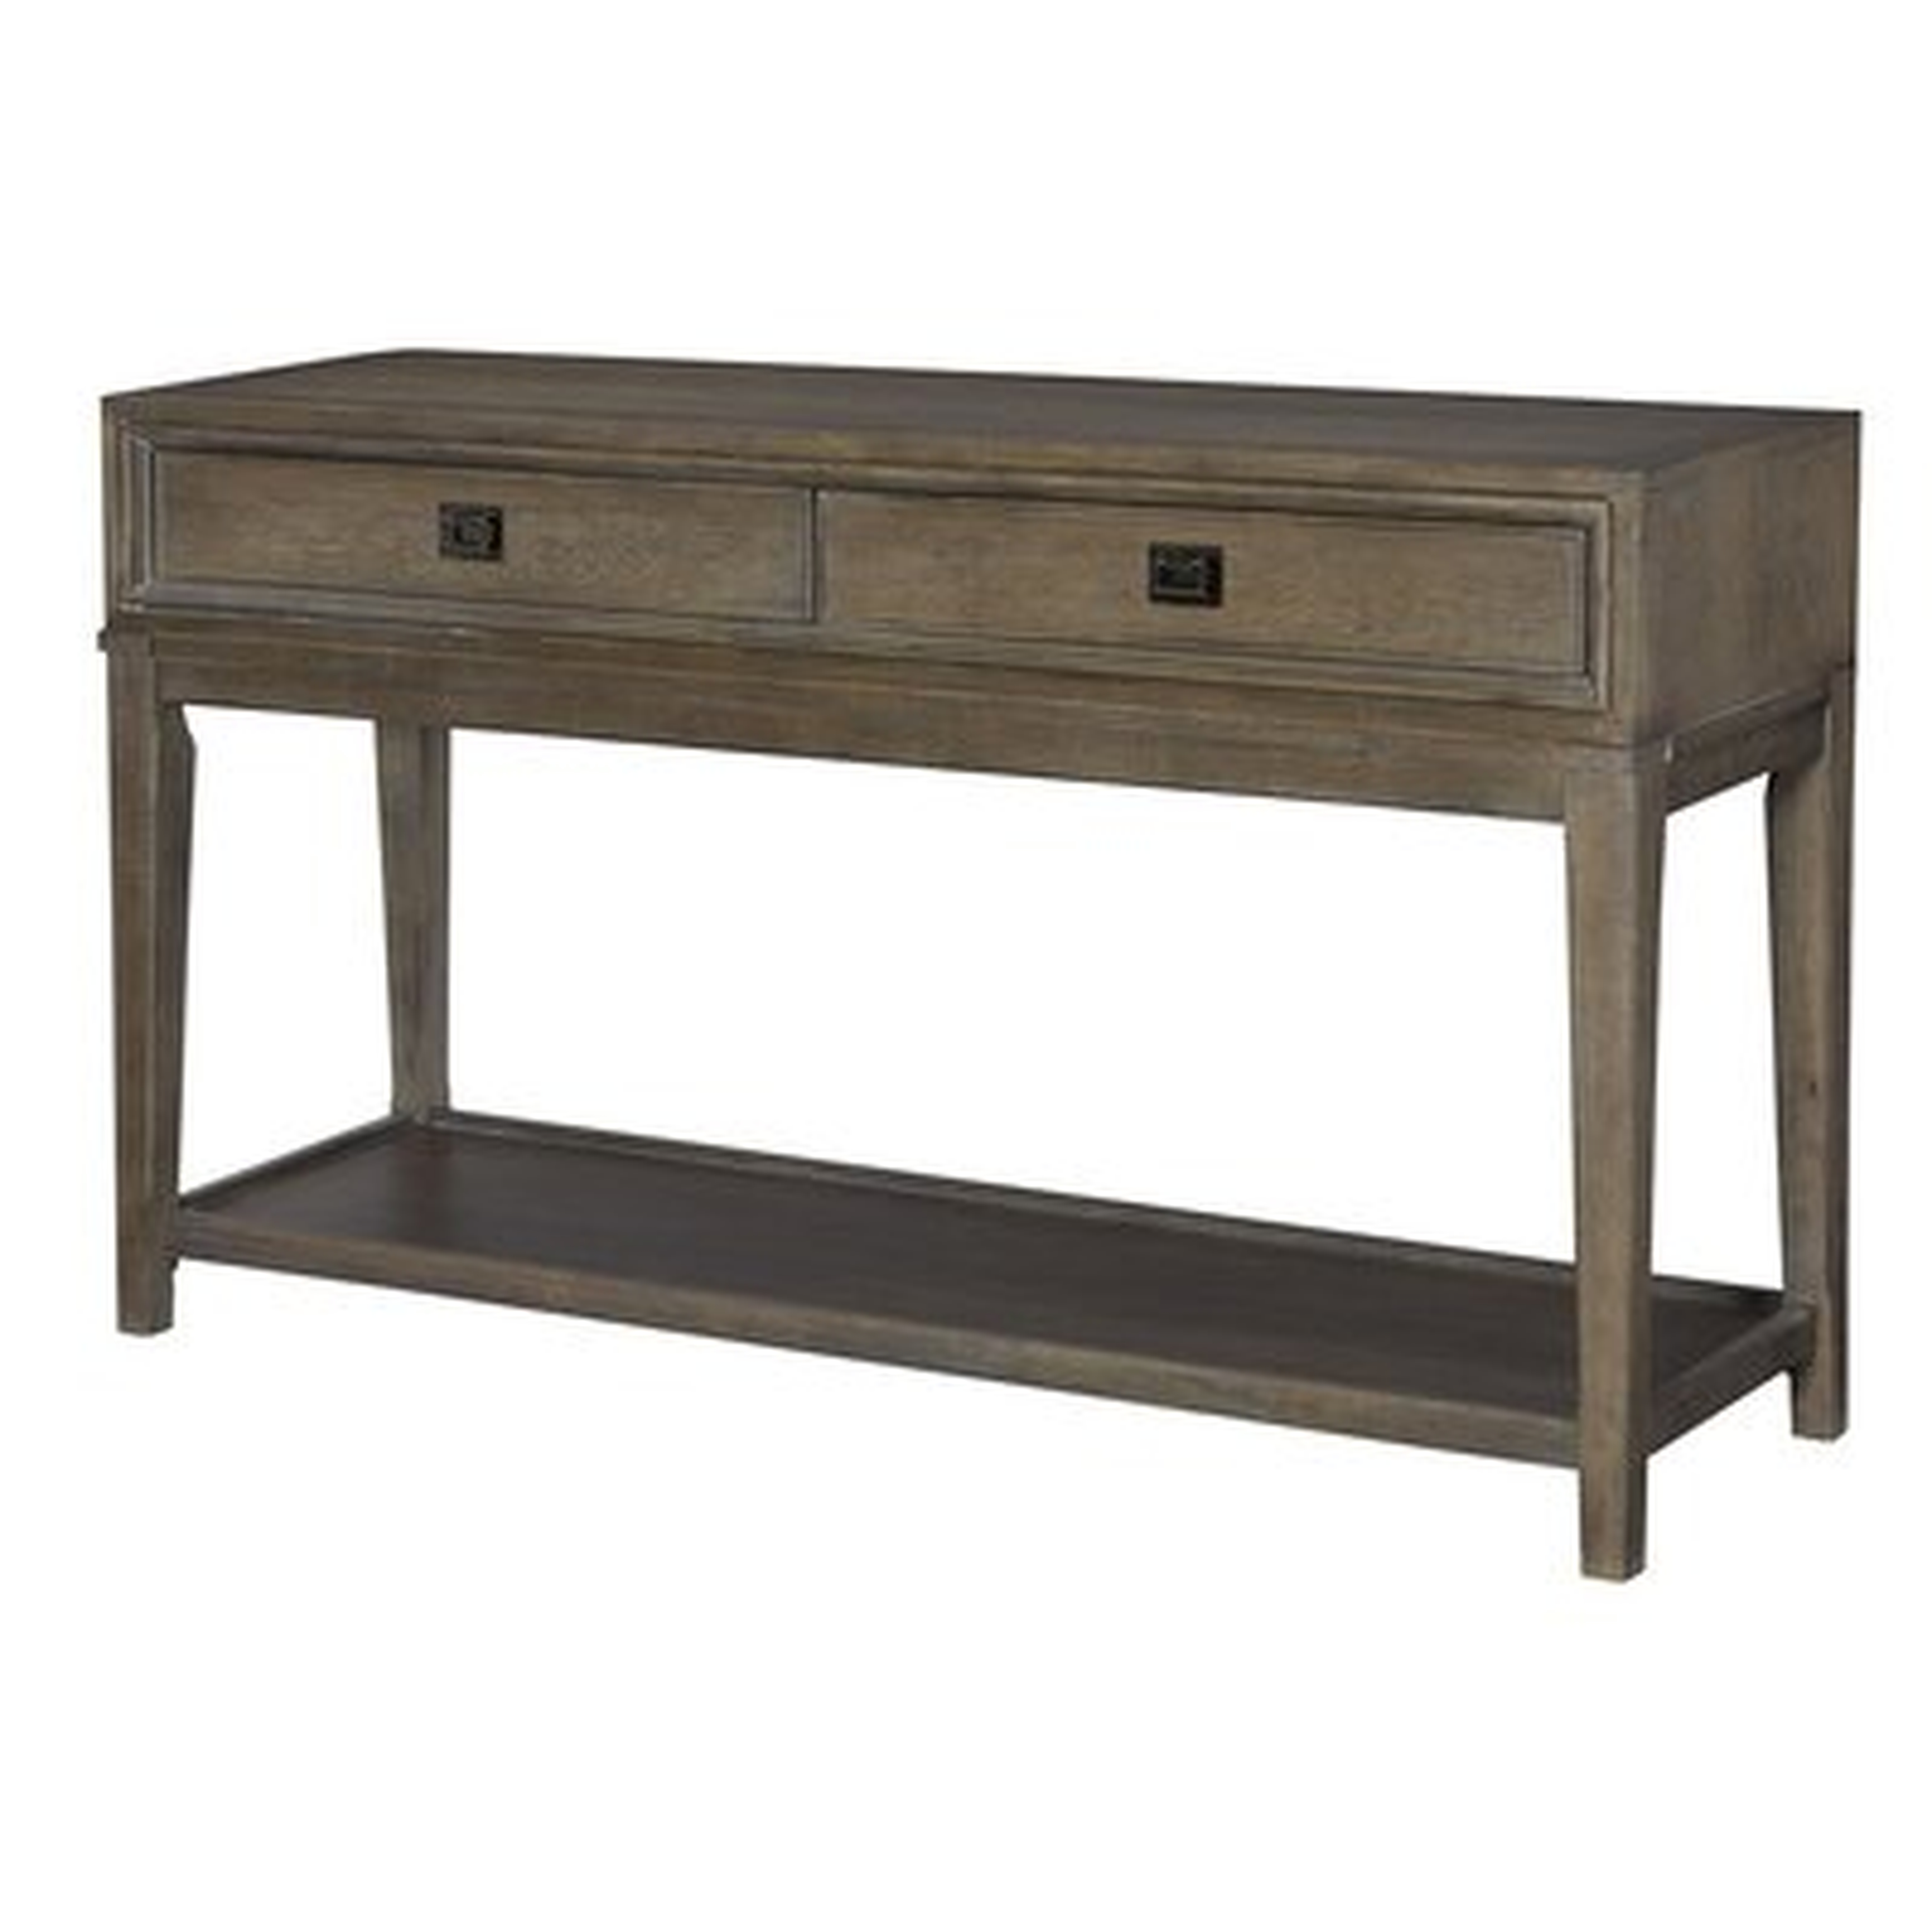 Pearlie Console Table - Birch Lane